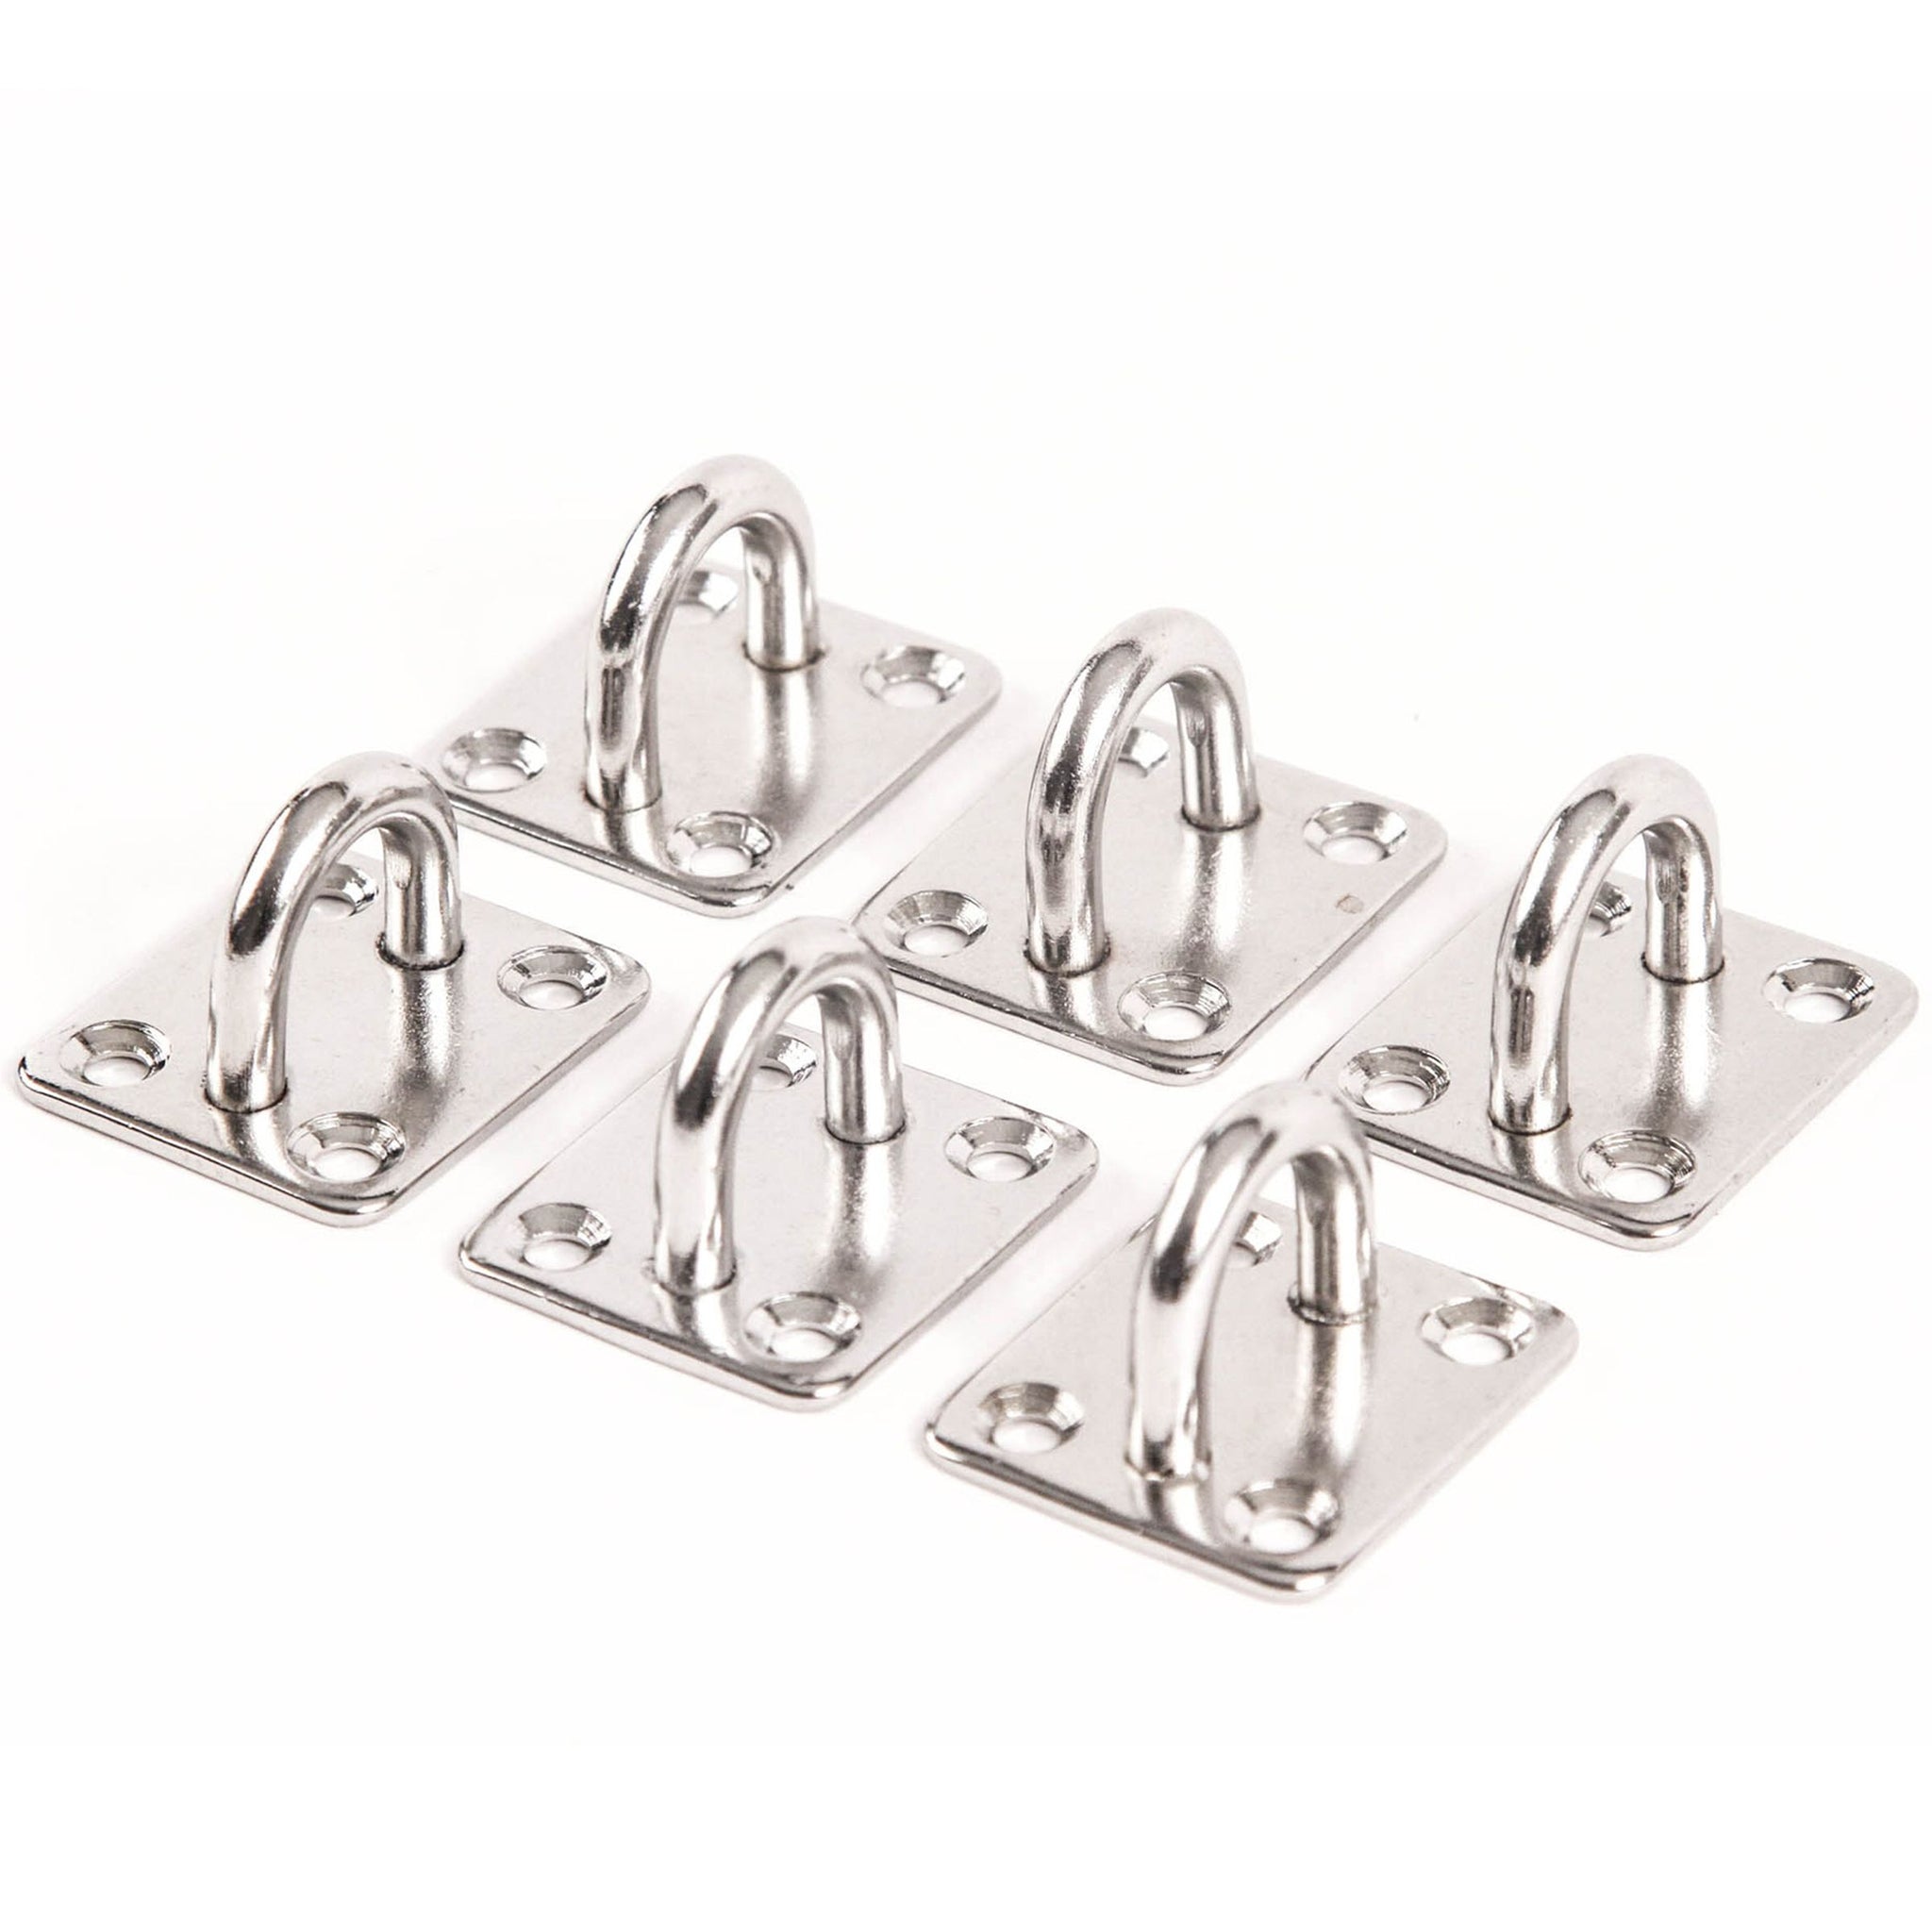 Red Hound Auto 6 Stainless Steel 316 6mm Square Eye Plates 1/4 Inches Marine SS Pad Boat Rigging